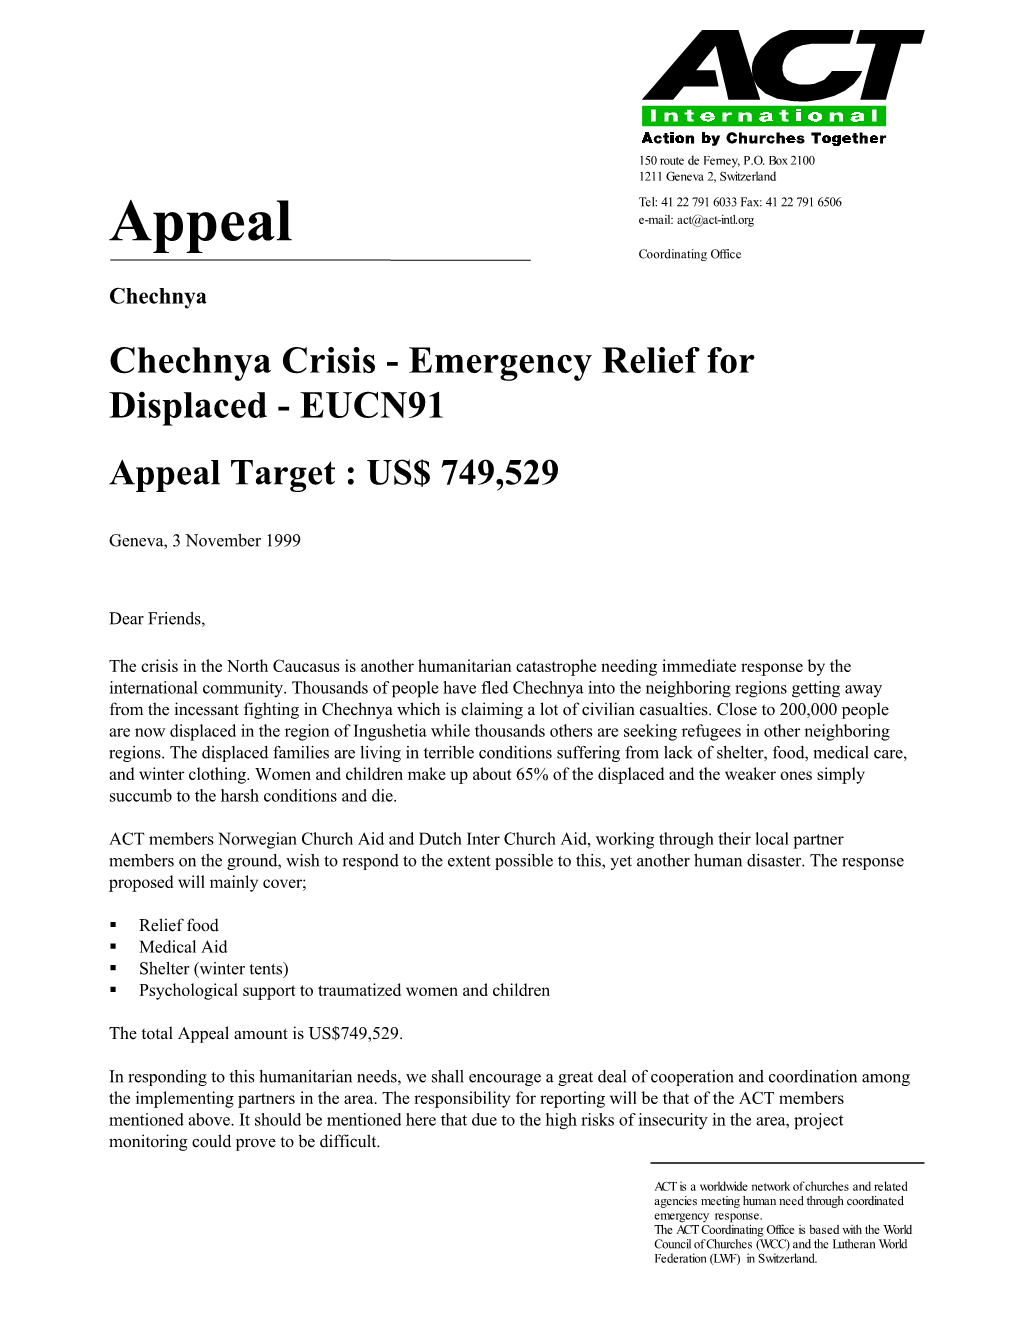 ACT Chechnya Appeal